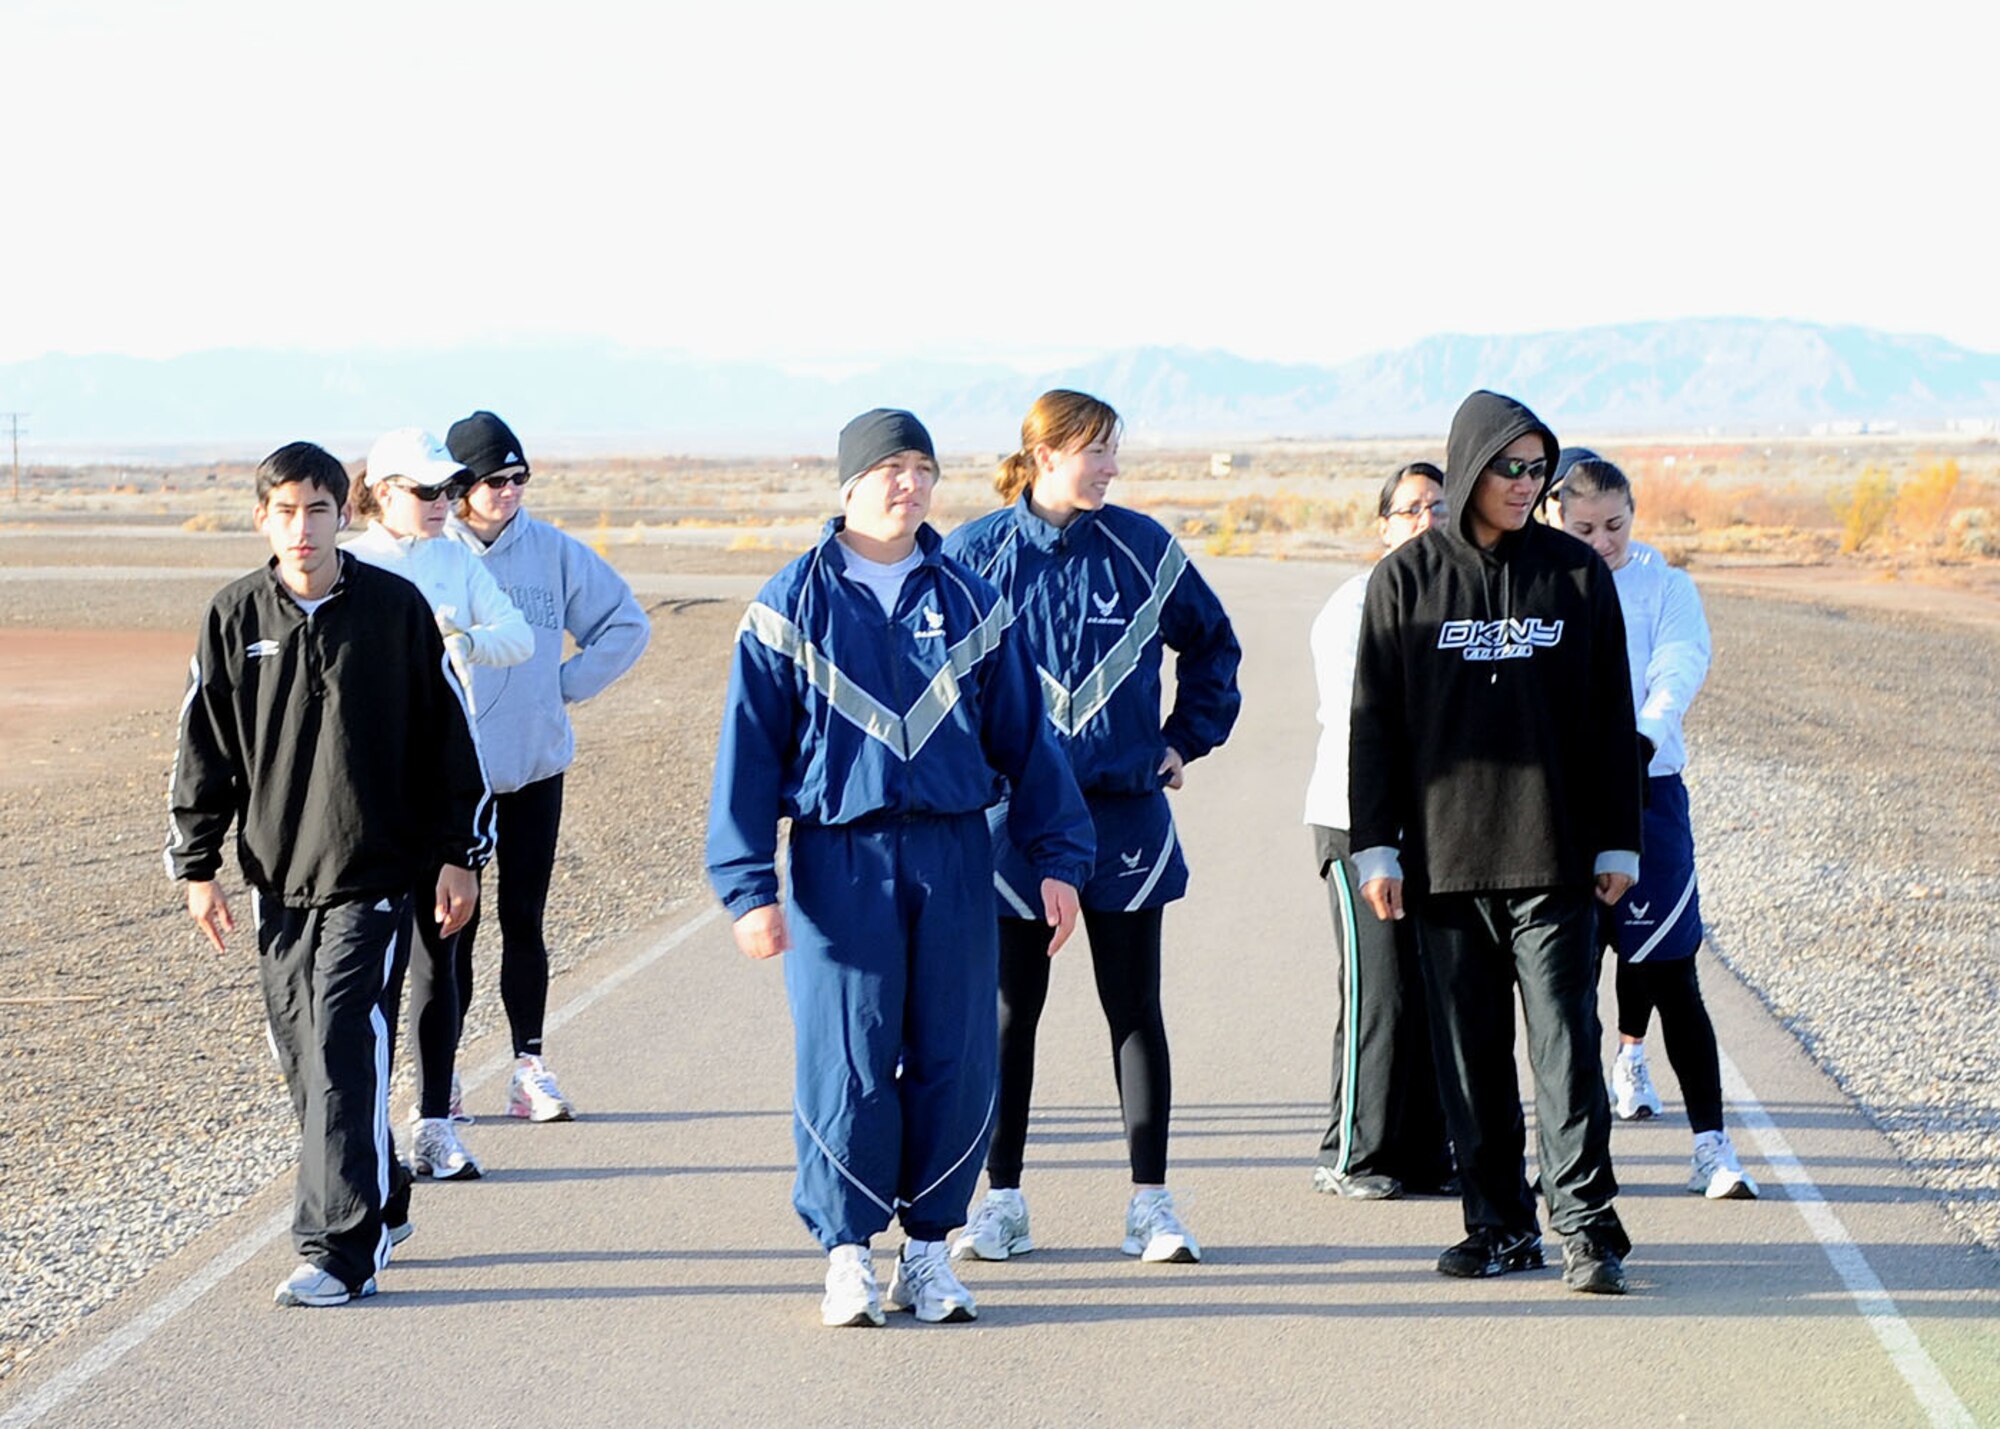 Participants in the Holloman Air Force Base, N.M., Frosty 5k run prepare for the start of the event at the Fitness and Sports Center track Dec. 19. The Frosty 5k run was the 12th and last run of 2008. (U.S Air Force photo/ Airman 1st Class DeAndre Curtiss)